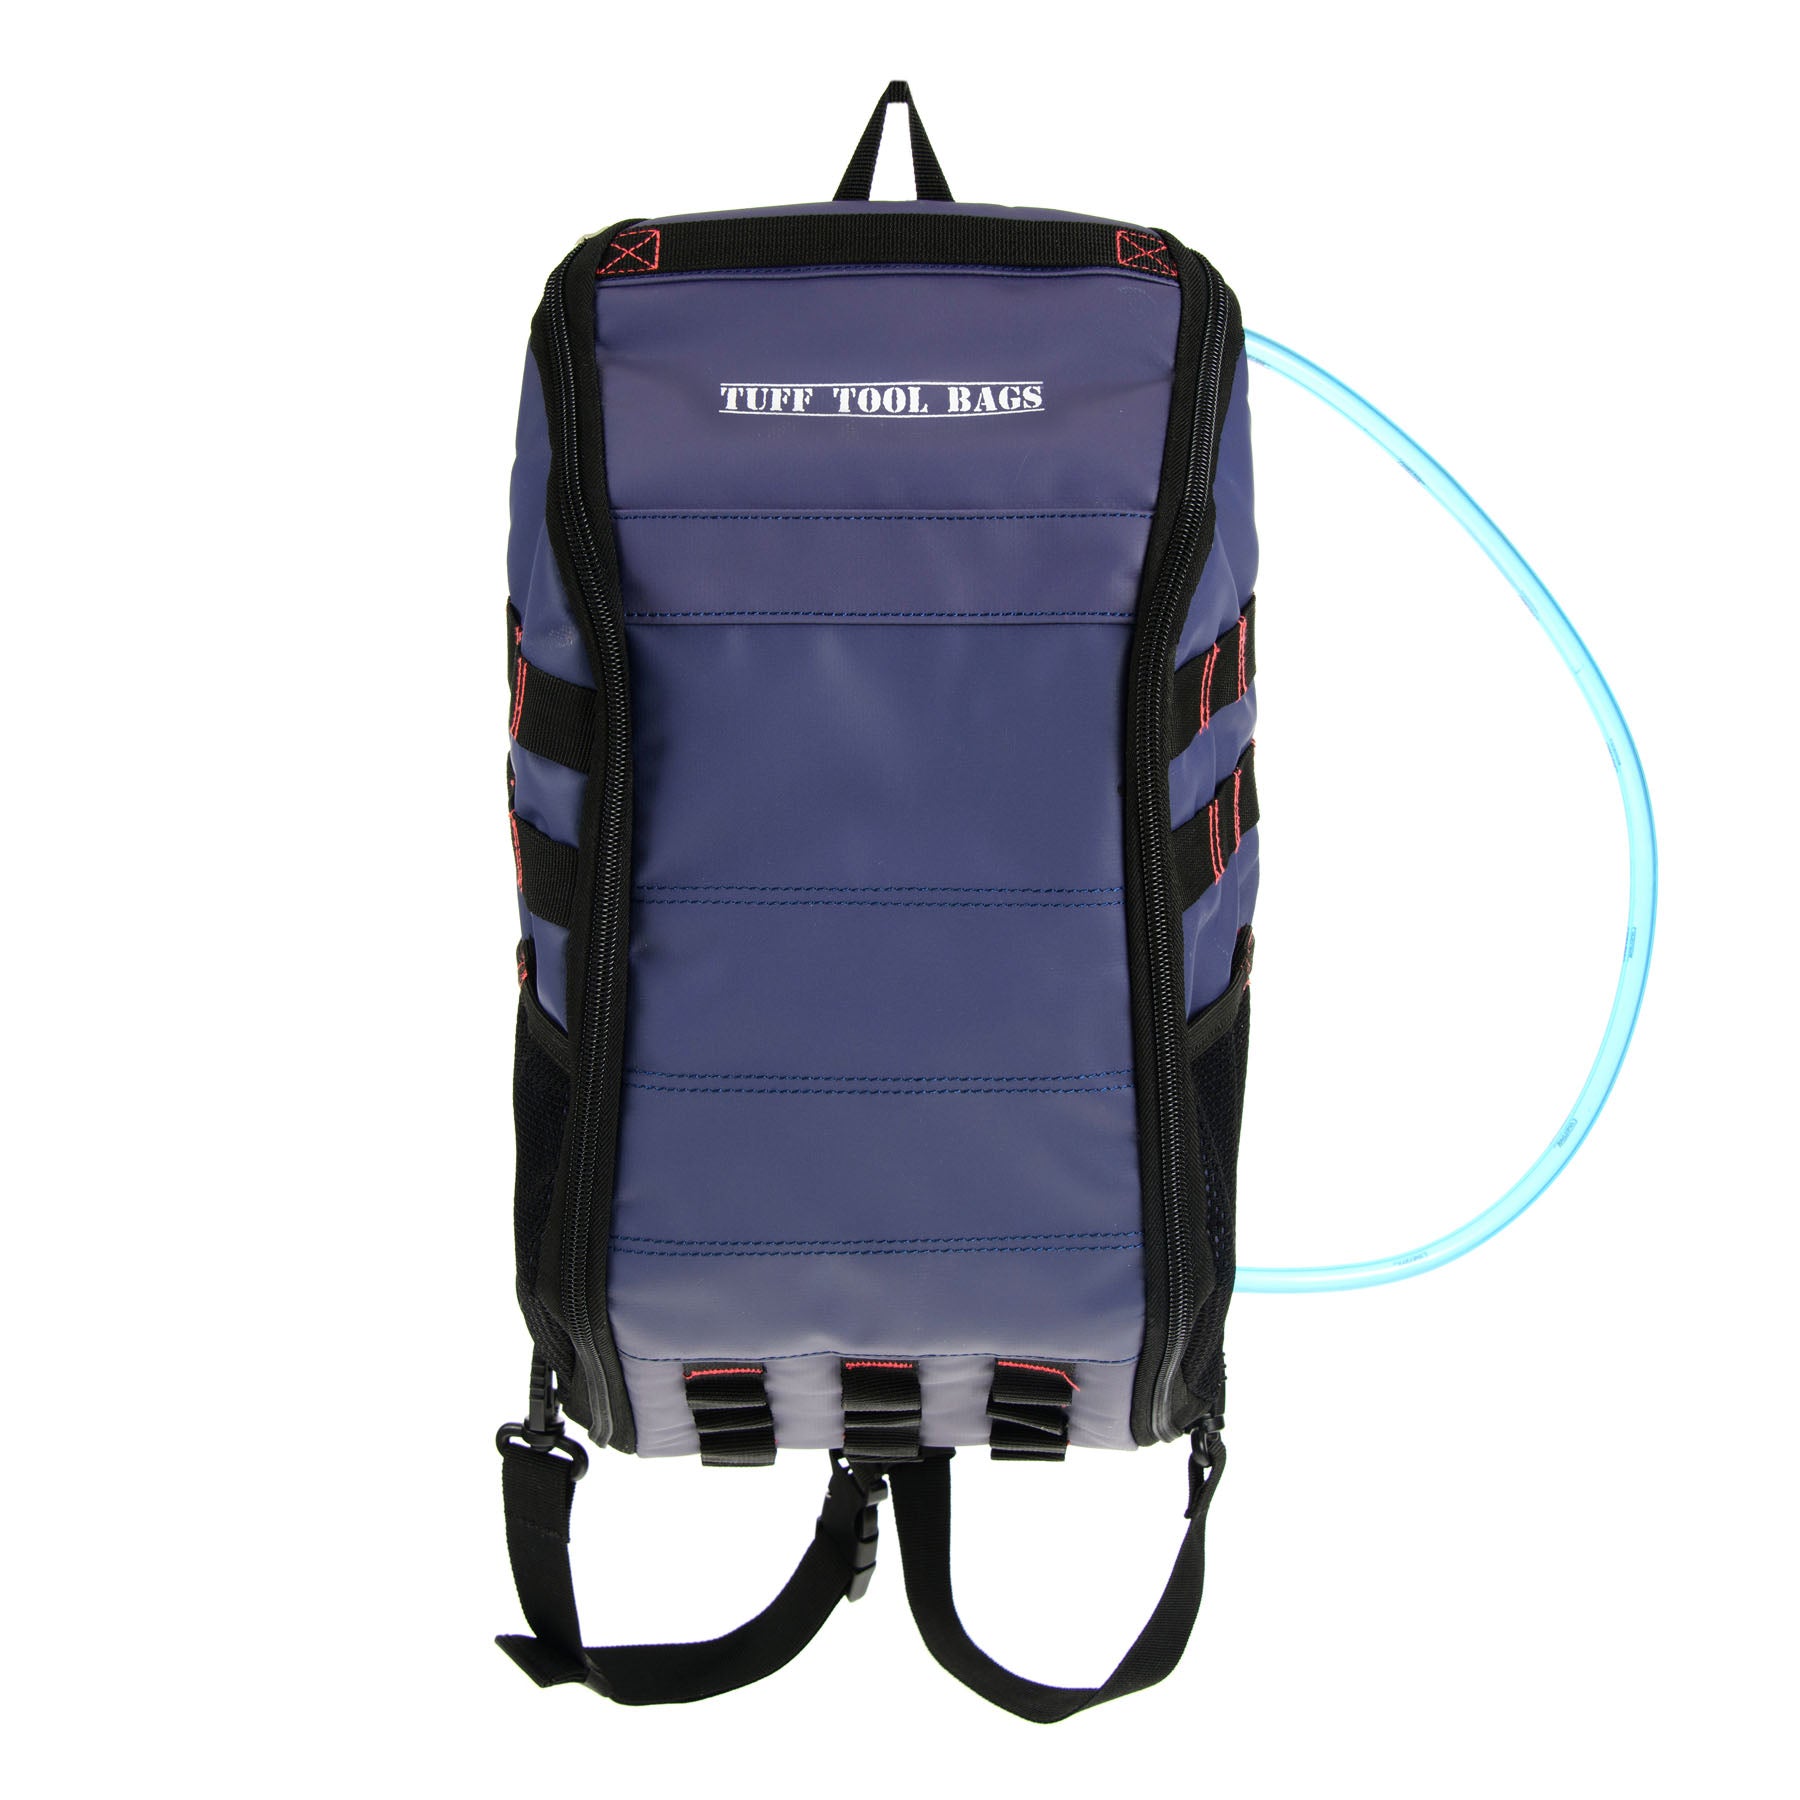 Tuff-Tool-Bags-The-Sling-Hydration-Tool-Bag-lockable-back-pack